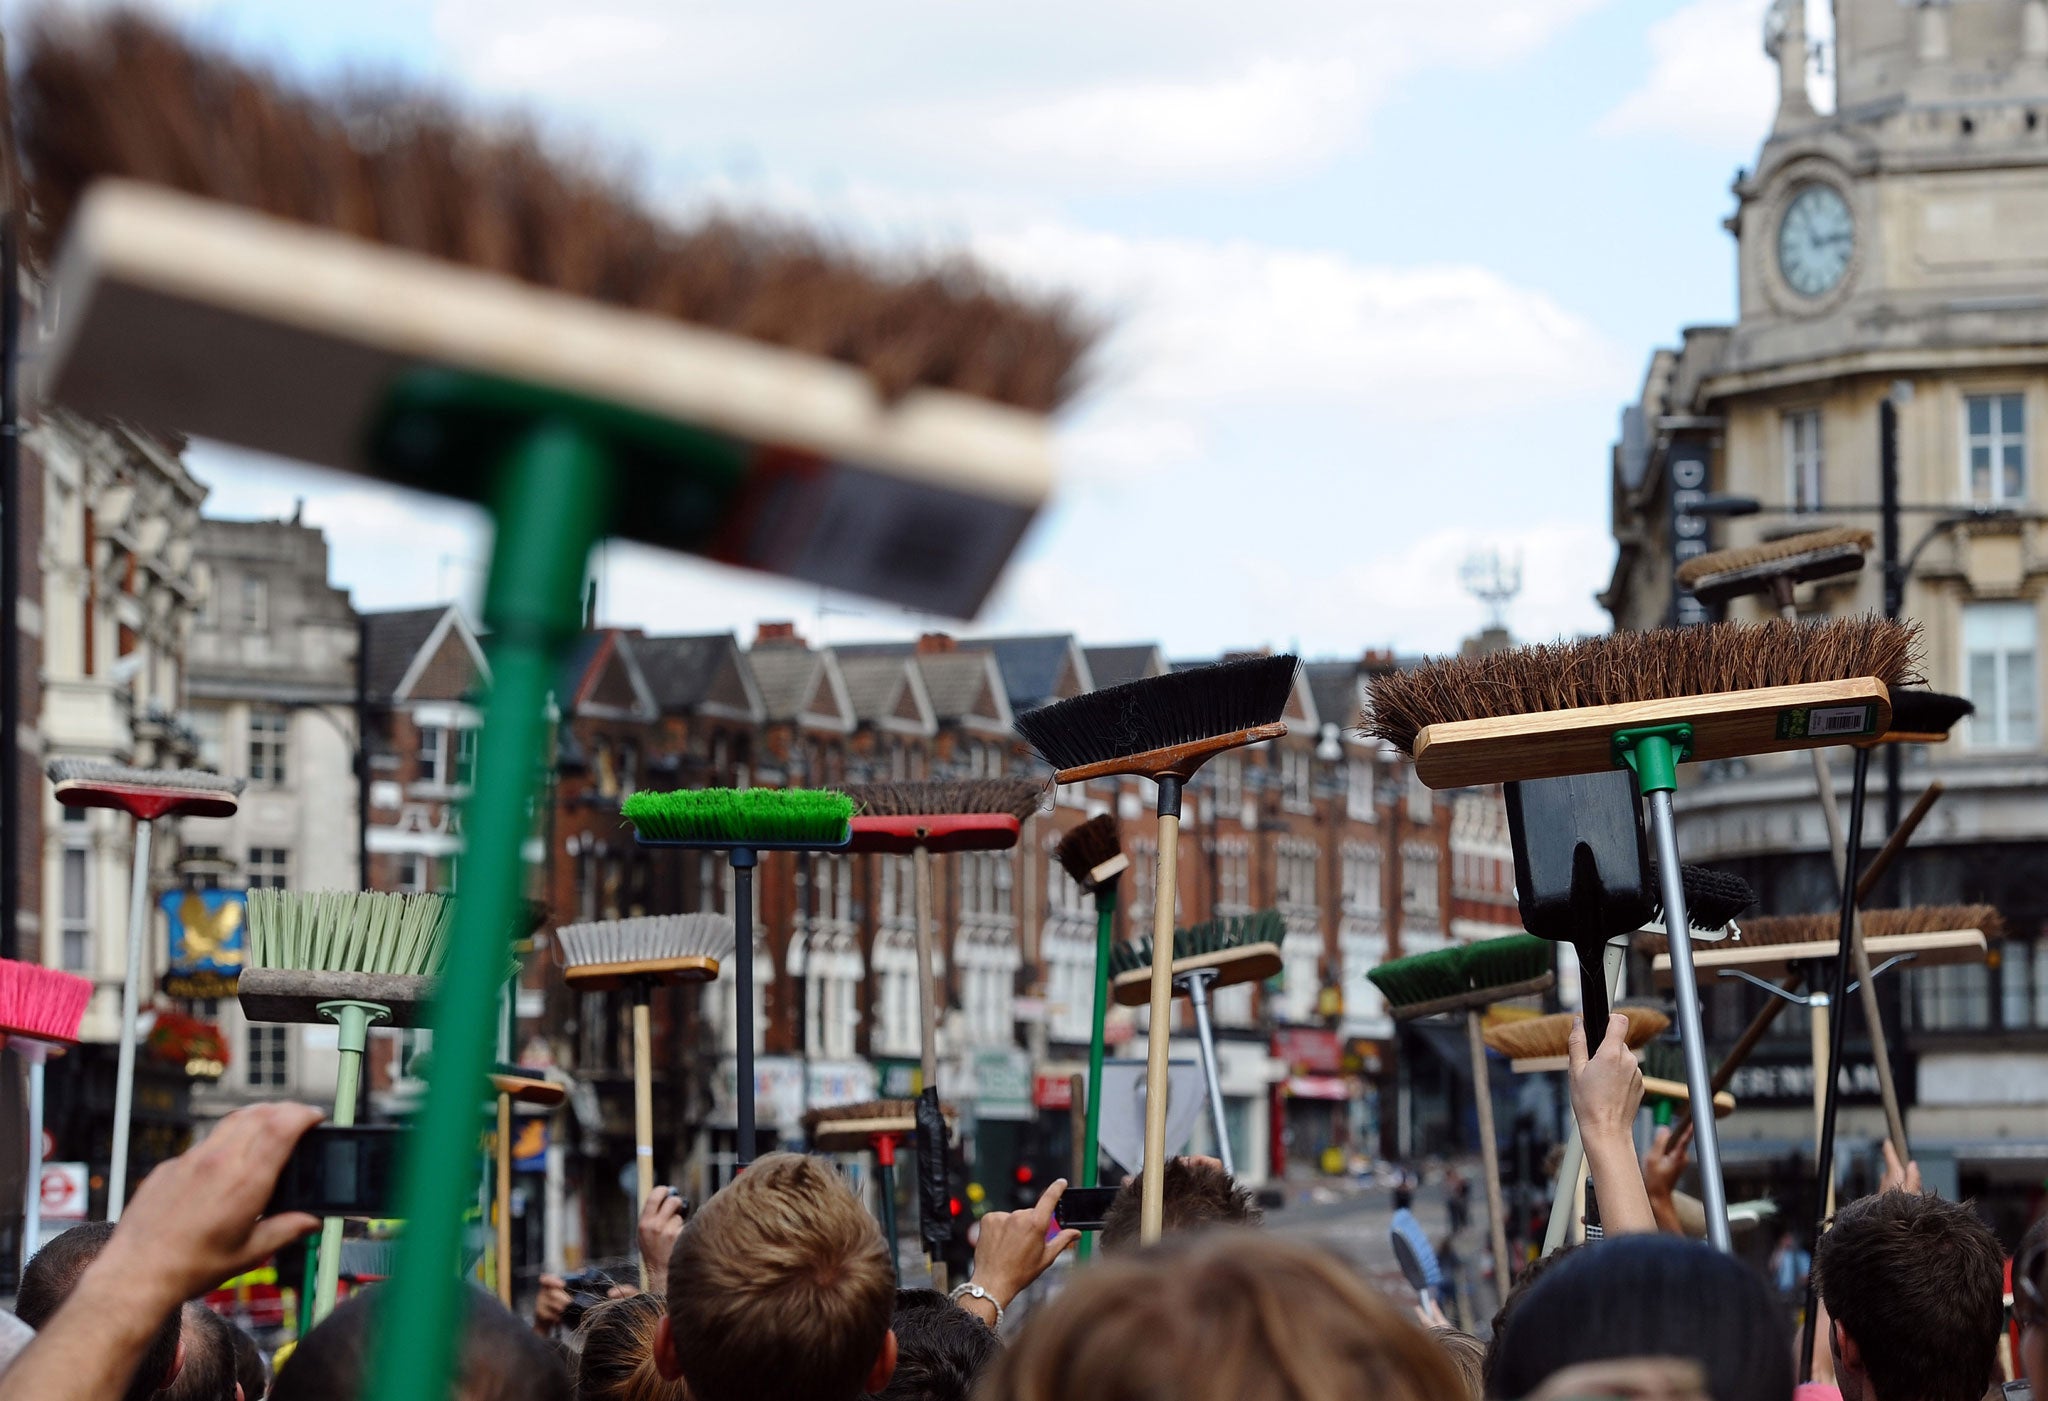 Members of the public show their brushes on August 9, 2011, as they prepare to clean their streets in Clapham Junction, in south London, after riots hit the area